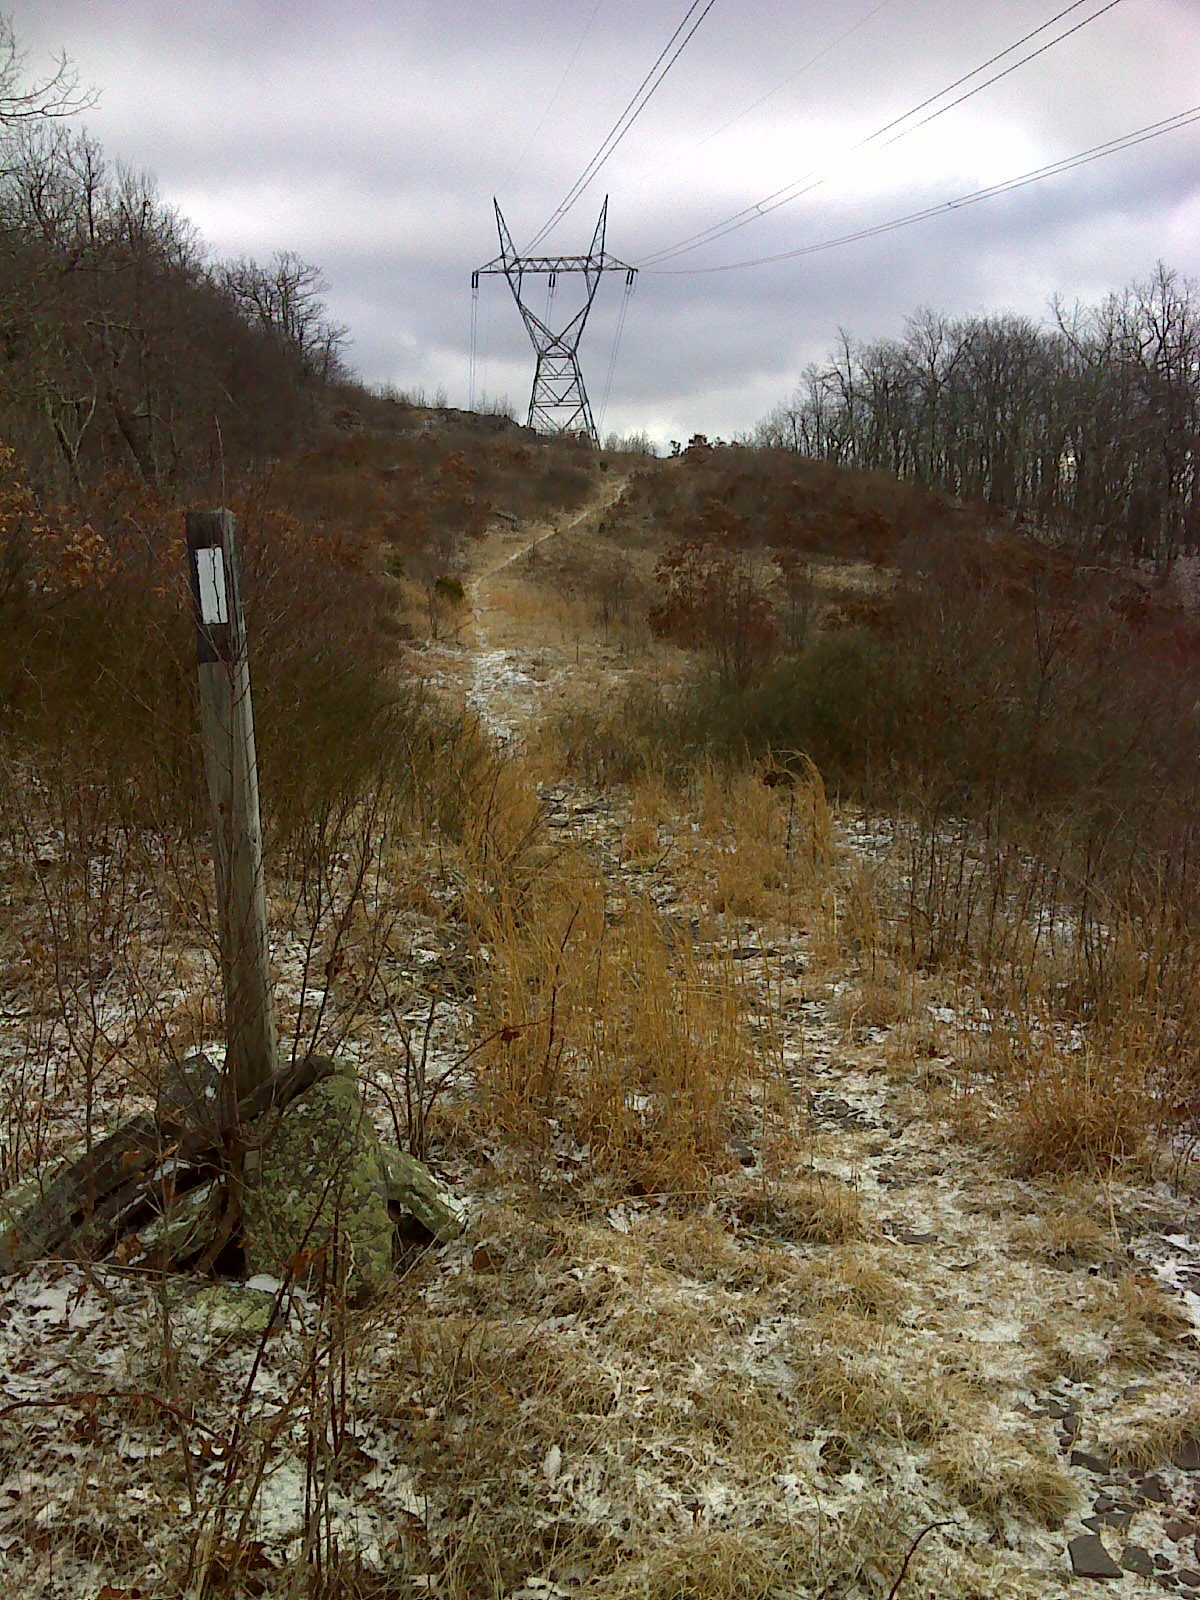 mm 11.9 AT follows the power line clearing for a stretch
Courtesy pjwetzel@gmail.com